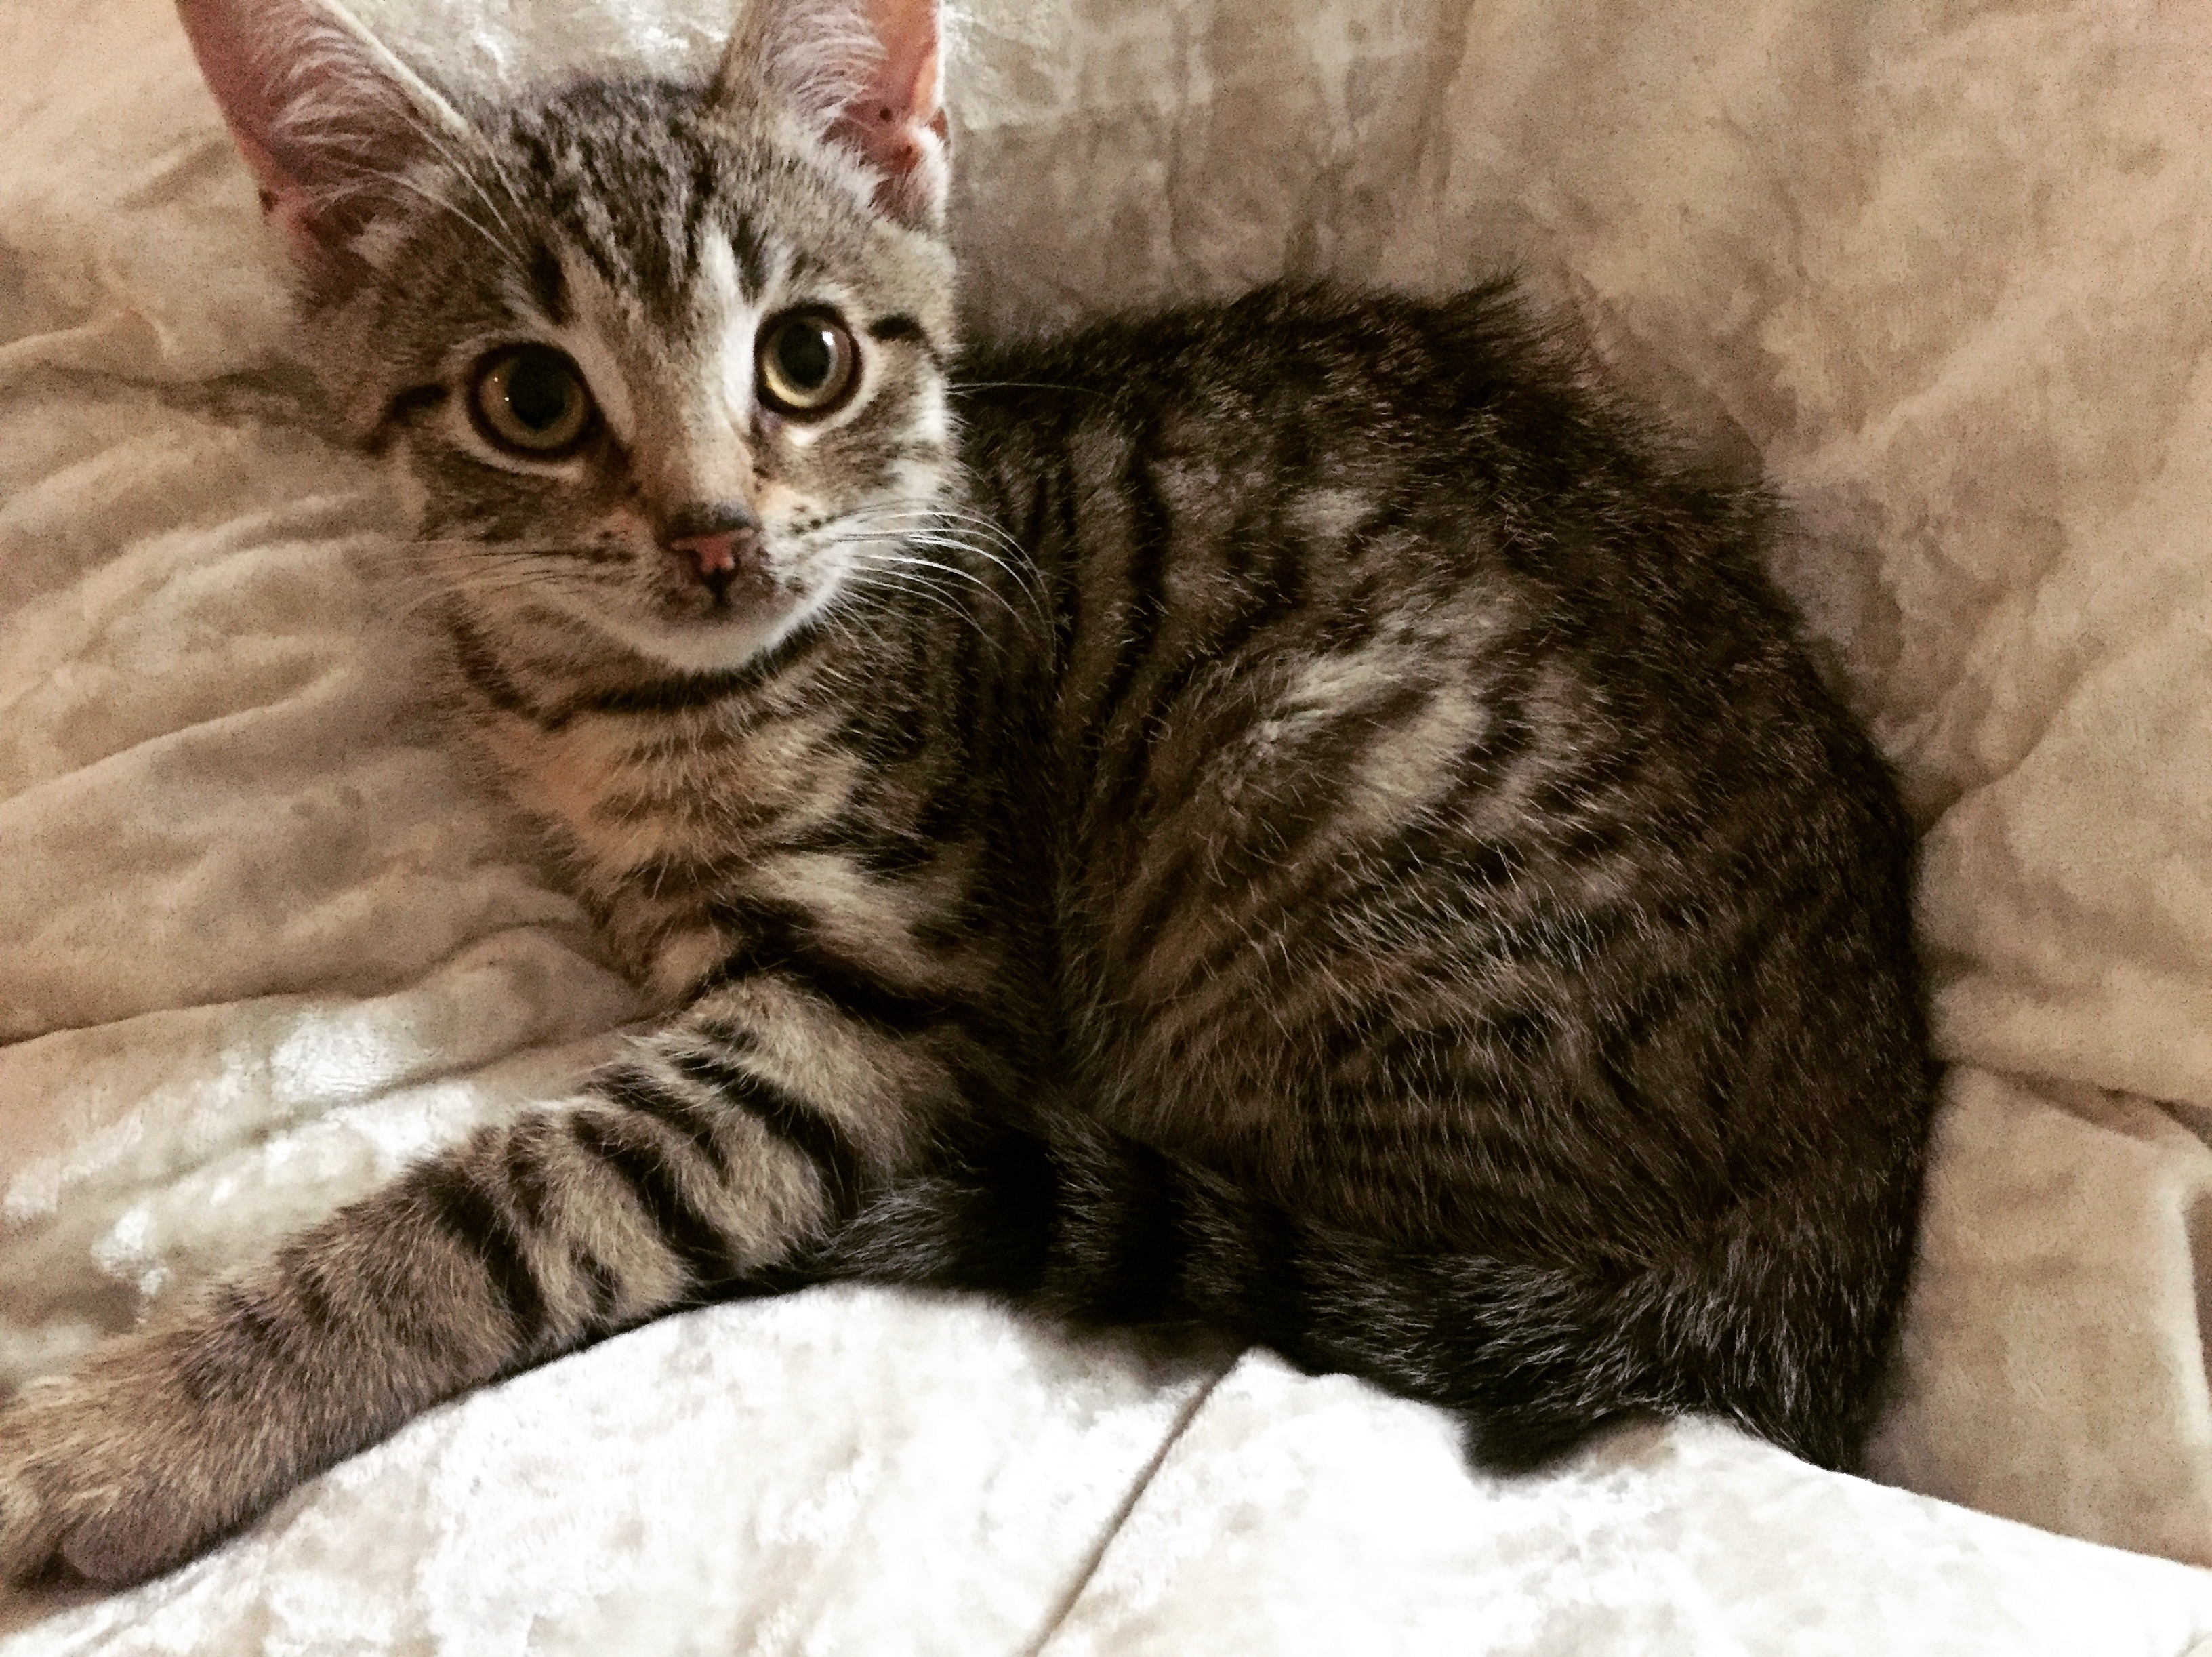 What Breed Is My Tabby Cat? TheCatSite